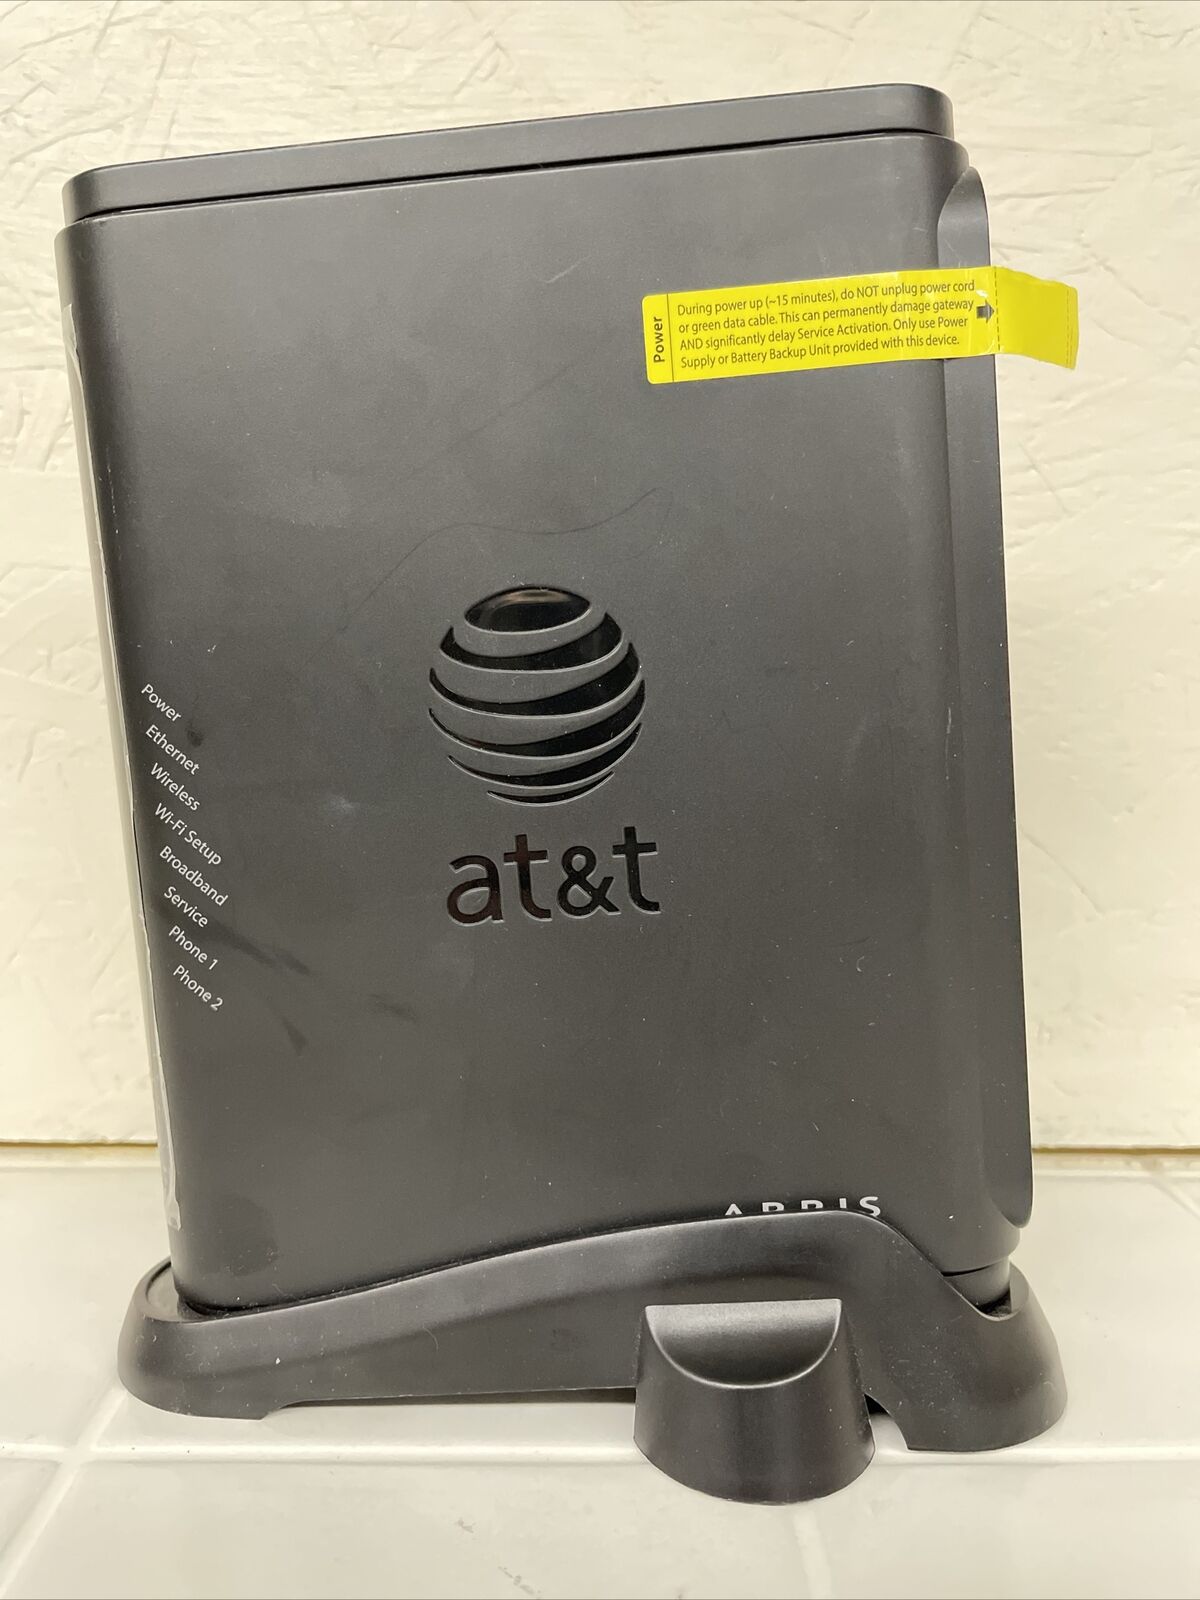 ARRIS NVG510 Broadband WiFi Modem Router (AT&T)